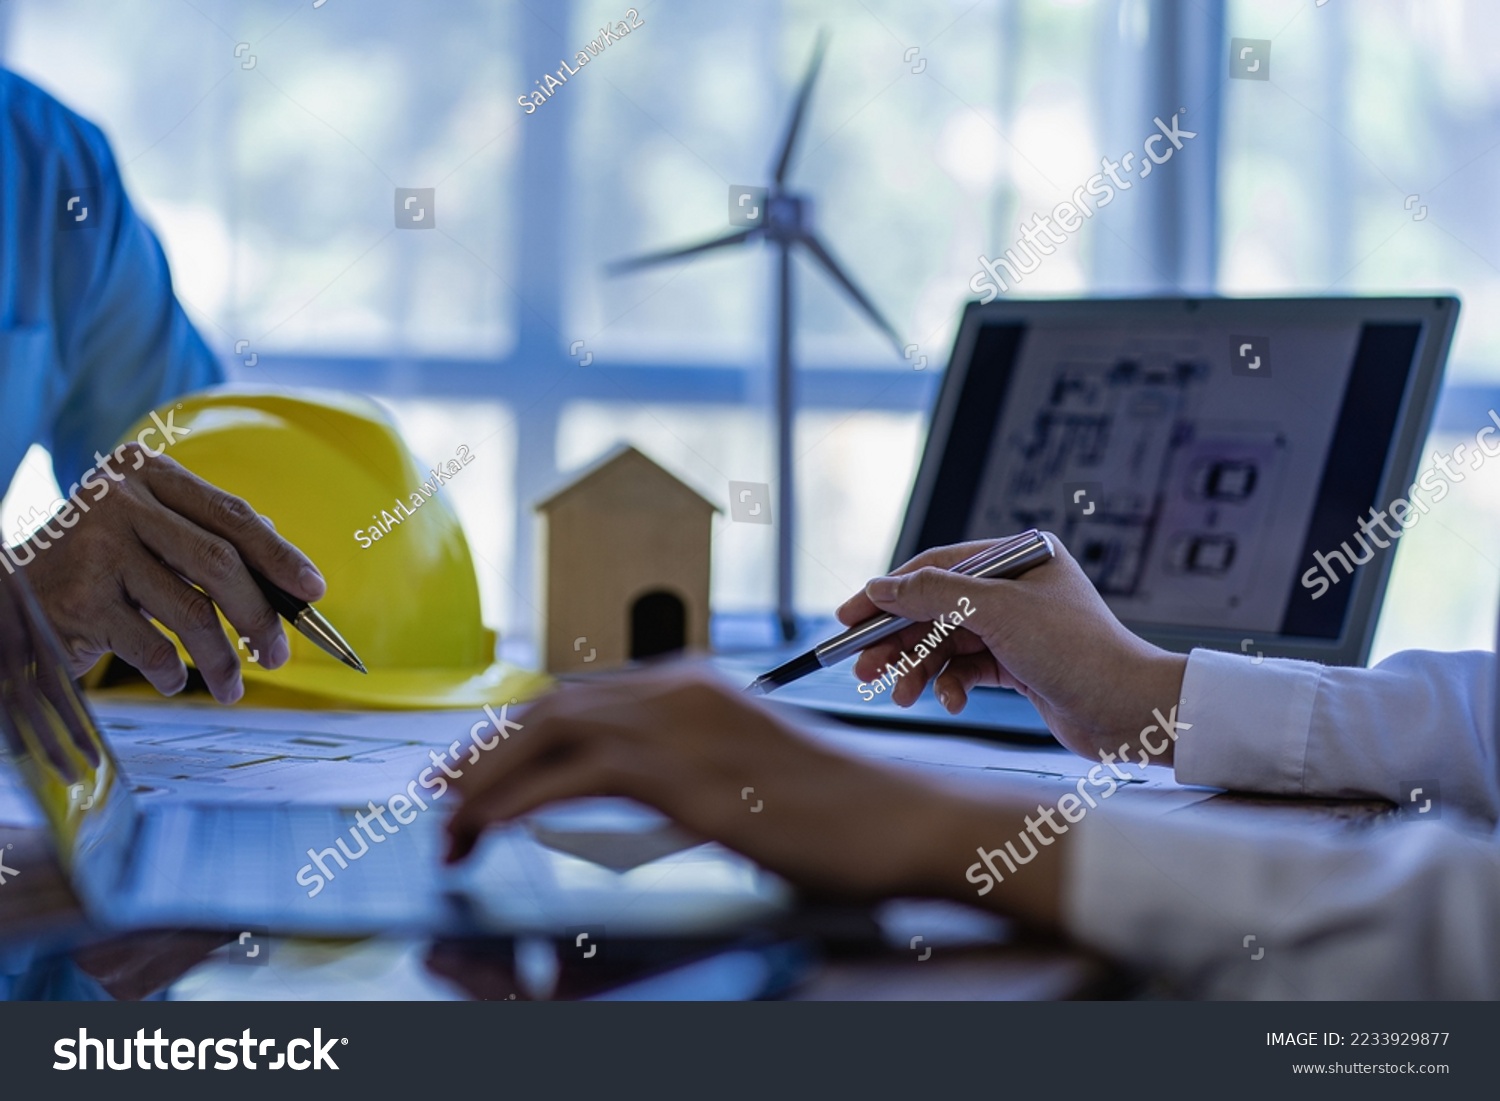 Professional design engineers discuss calculations to use pure natural energy and installing solar panels and wind turbines on the roof of houses to generate electricity, energy saving and global warm #2233929877